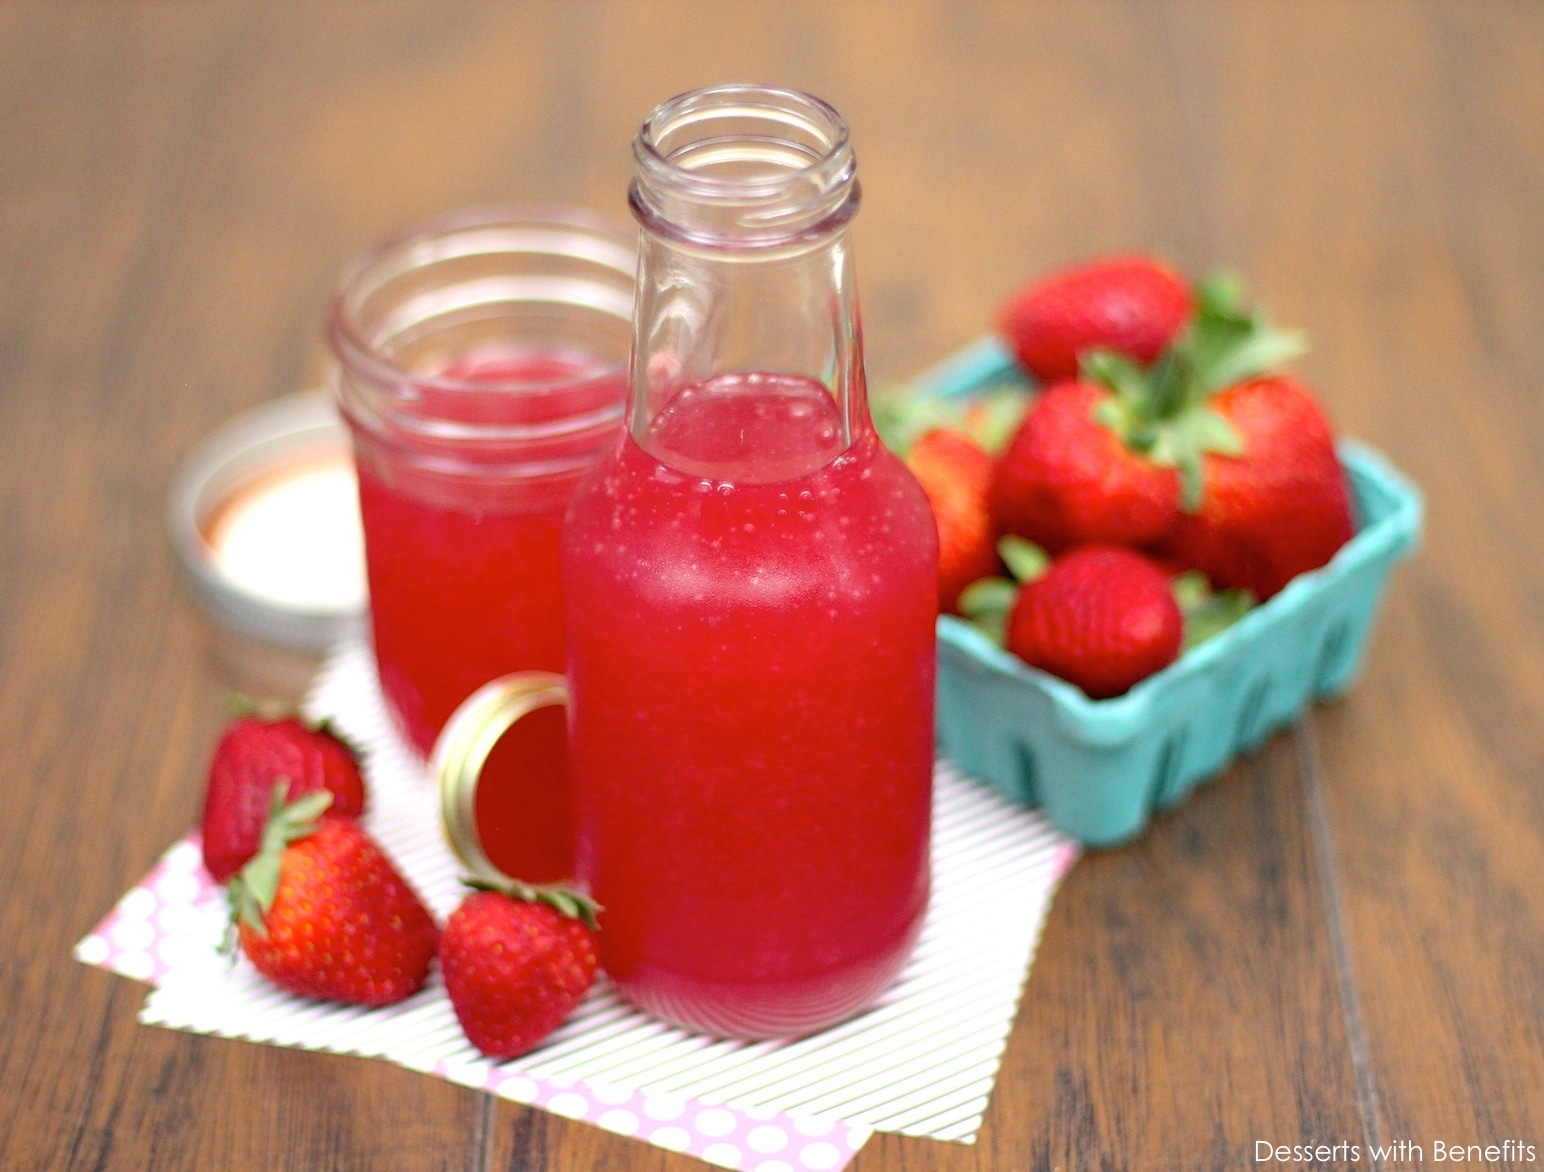 How to Make Sugar Free Strawberry Syrup Fat Free, Low